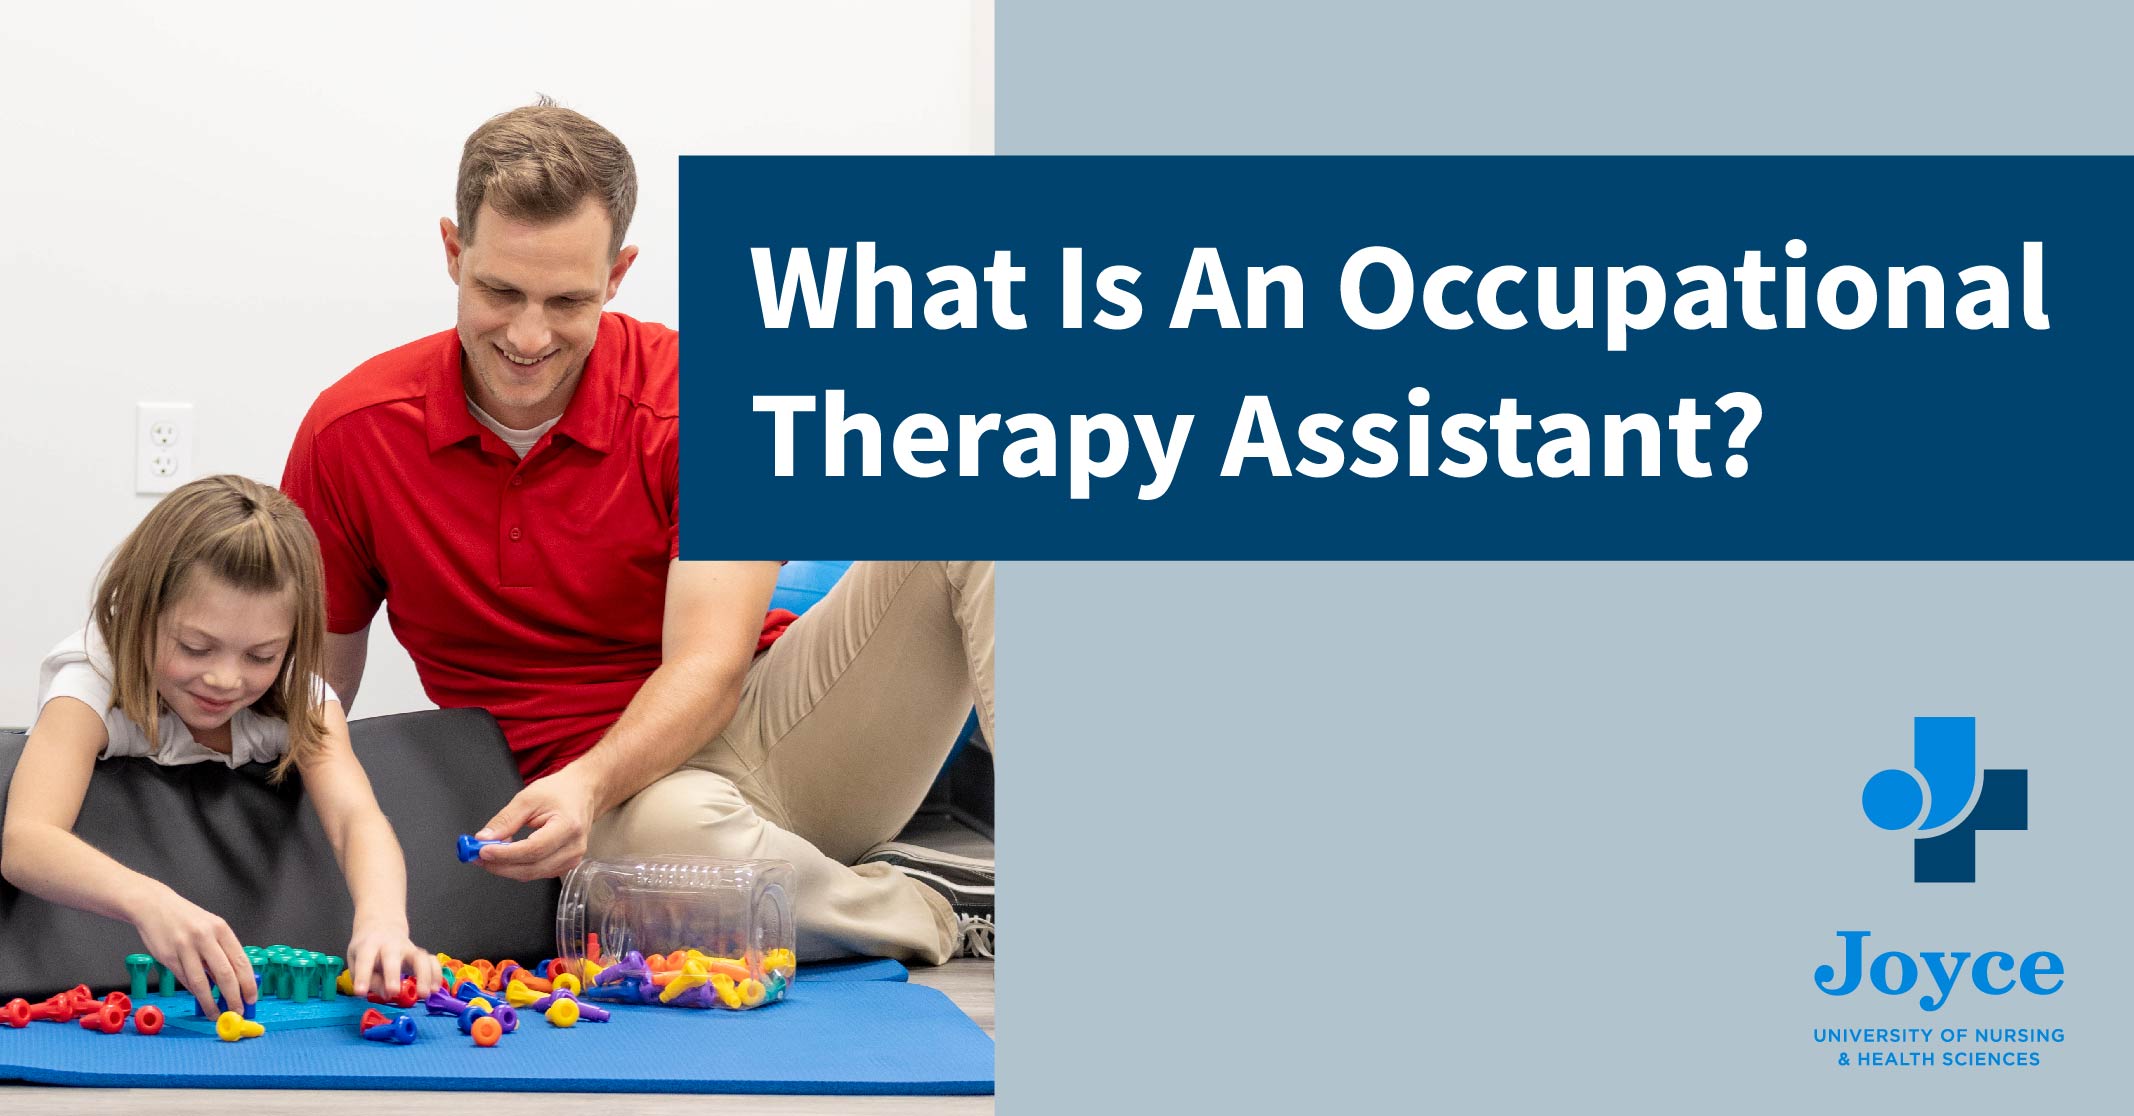 occupational therapy assistant helping child client